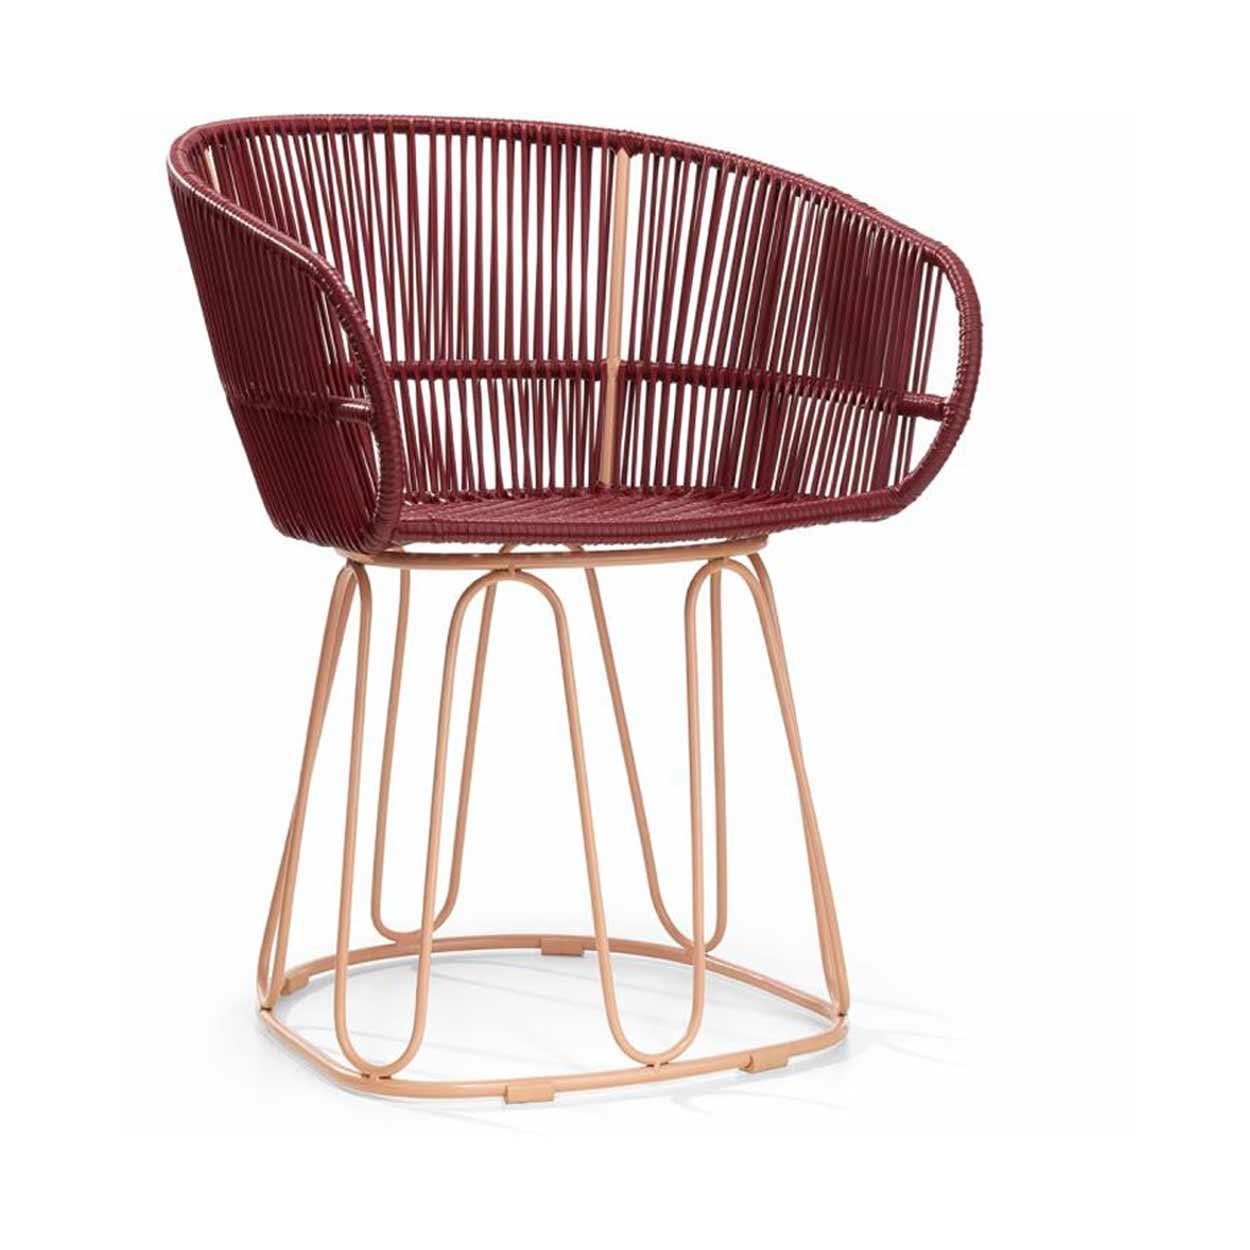 Ames Circo Indoor or Outdoor Dining Chair by Sebastian Herkner In New Condition For Sale In New York, NY